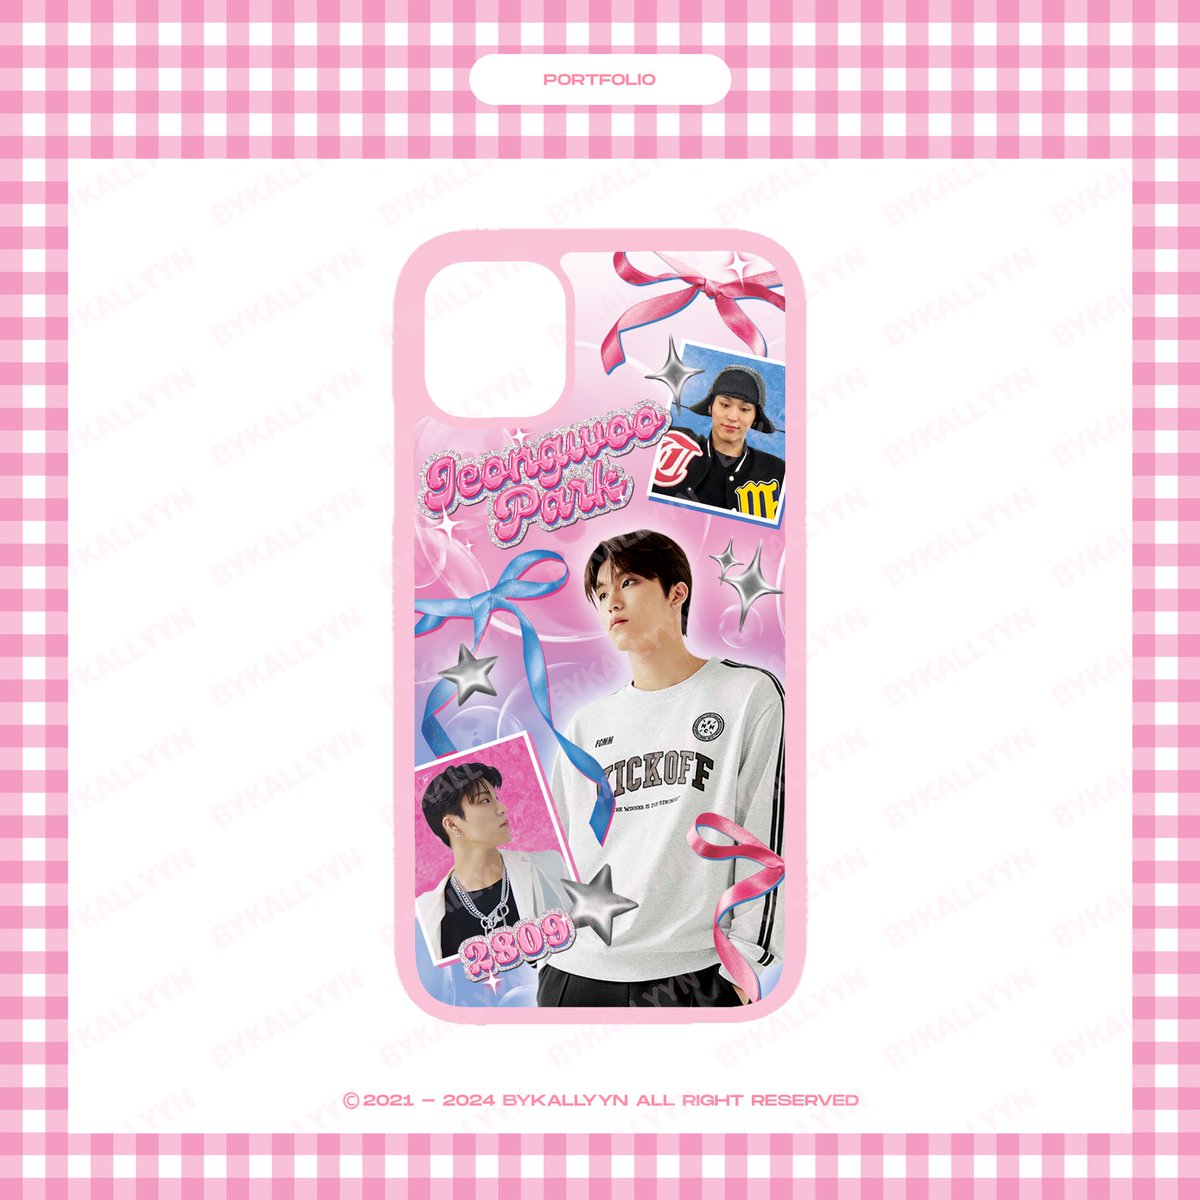 🍰 phone case

order/ask? please read📌
will be appreciated if you MENTION @bykallyyn when using our design 

tags - #디자인커미션 #컵홀더디자인 #포스터디자인 #포카디자인 #jasadesign #designcommission #jasaedit #jeongwoo #treasure